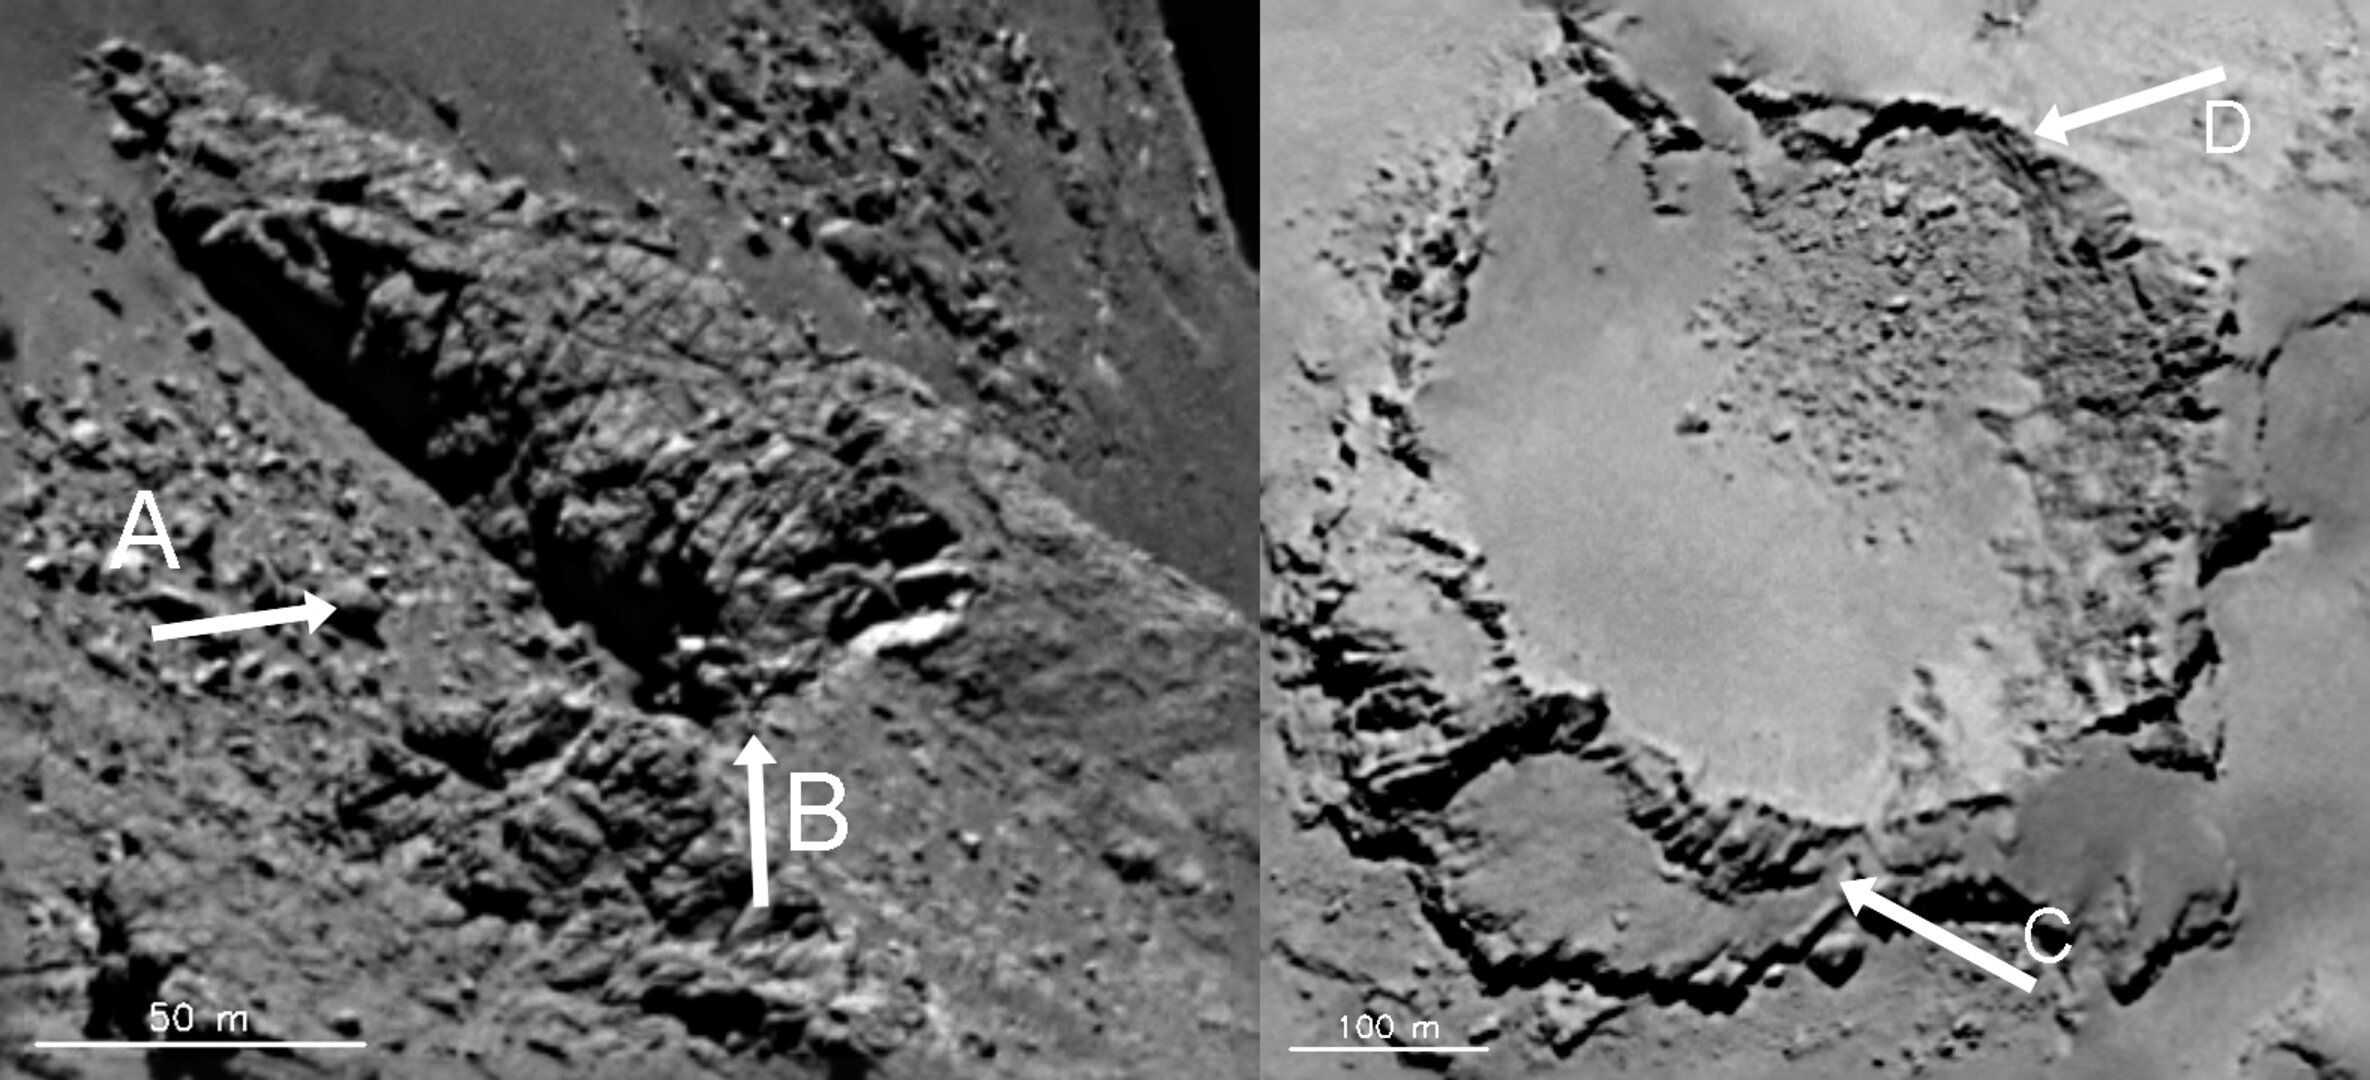 Fractures, uplift and debris (labelled)